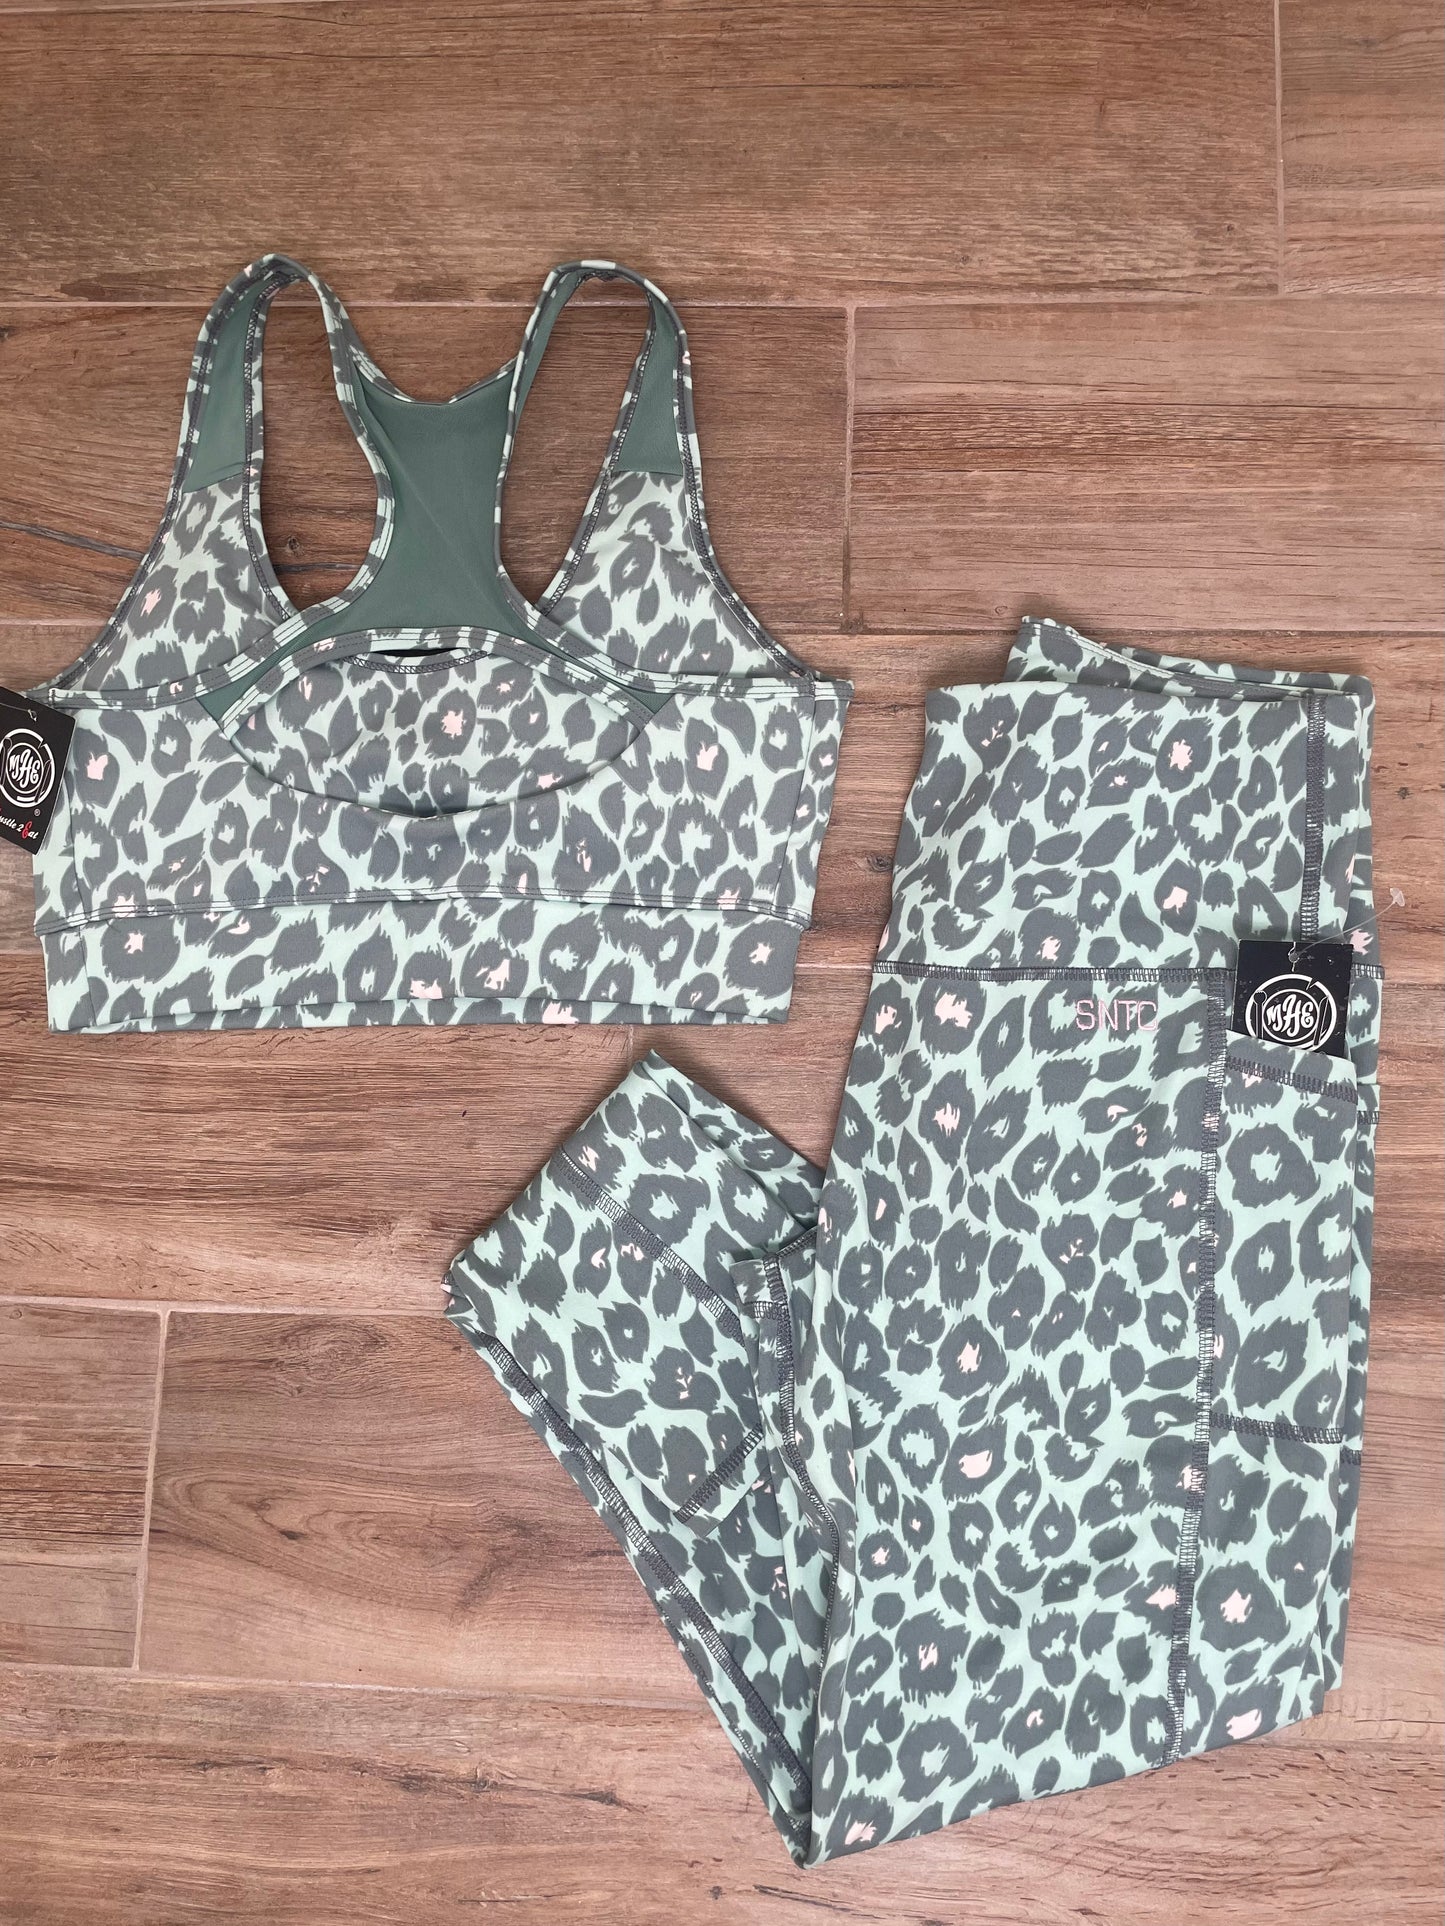 2-Piece Leopard Sports Bra and Legging Set- Embroidered SNTC